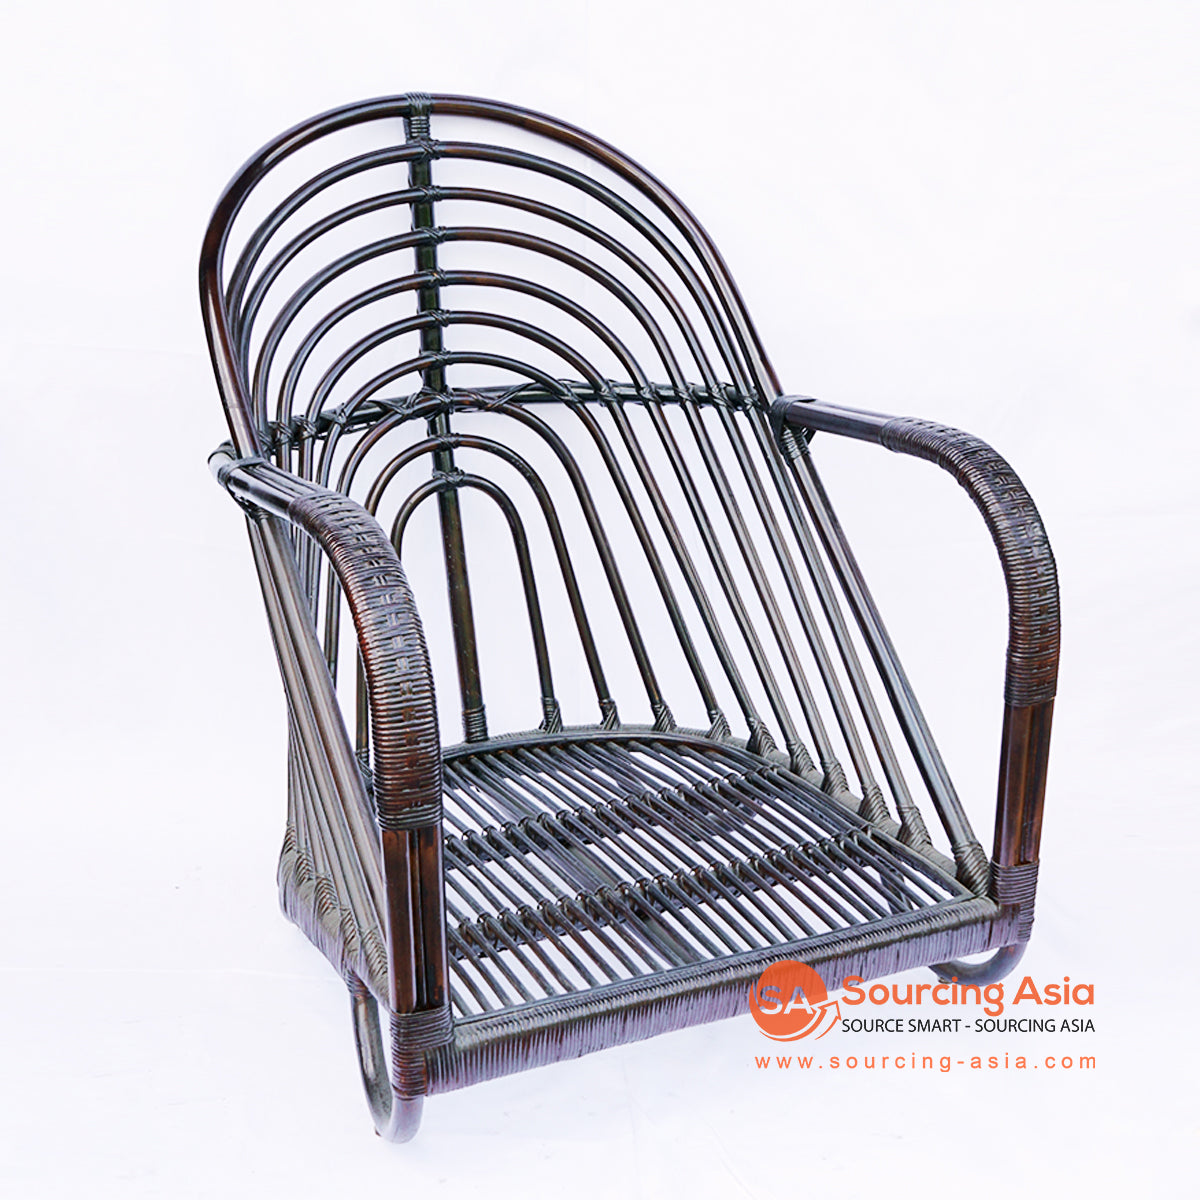 BNTC001-22 BLACK RATTAN GAPED AND ARMED LOW CHAIR